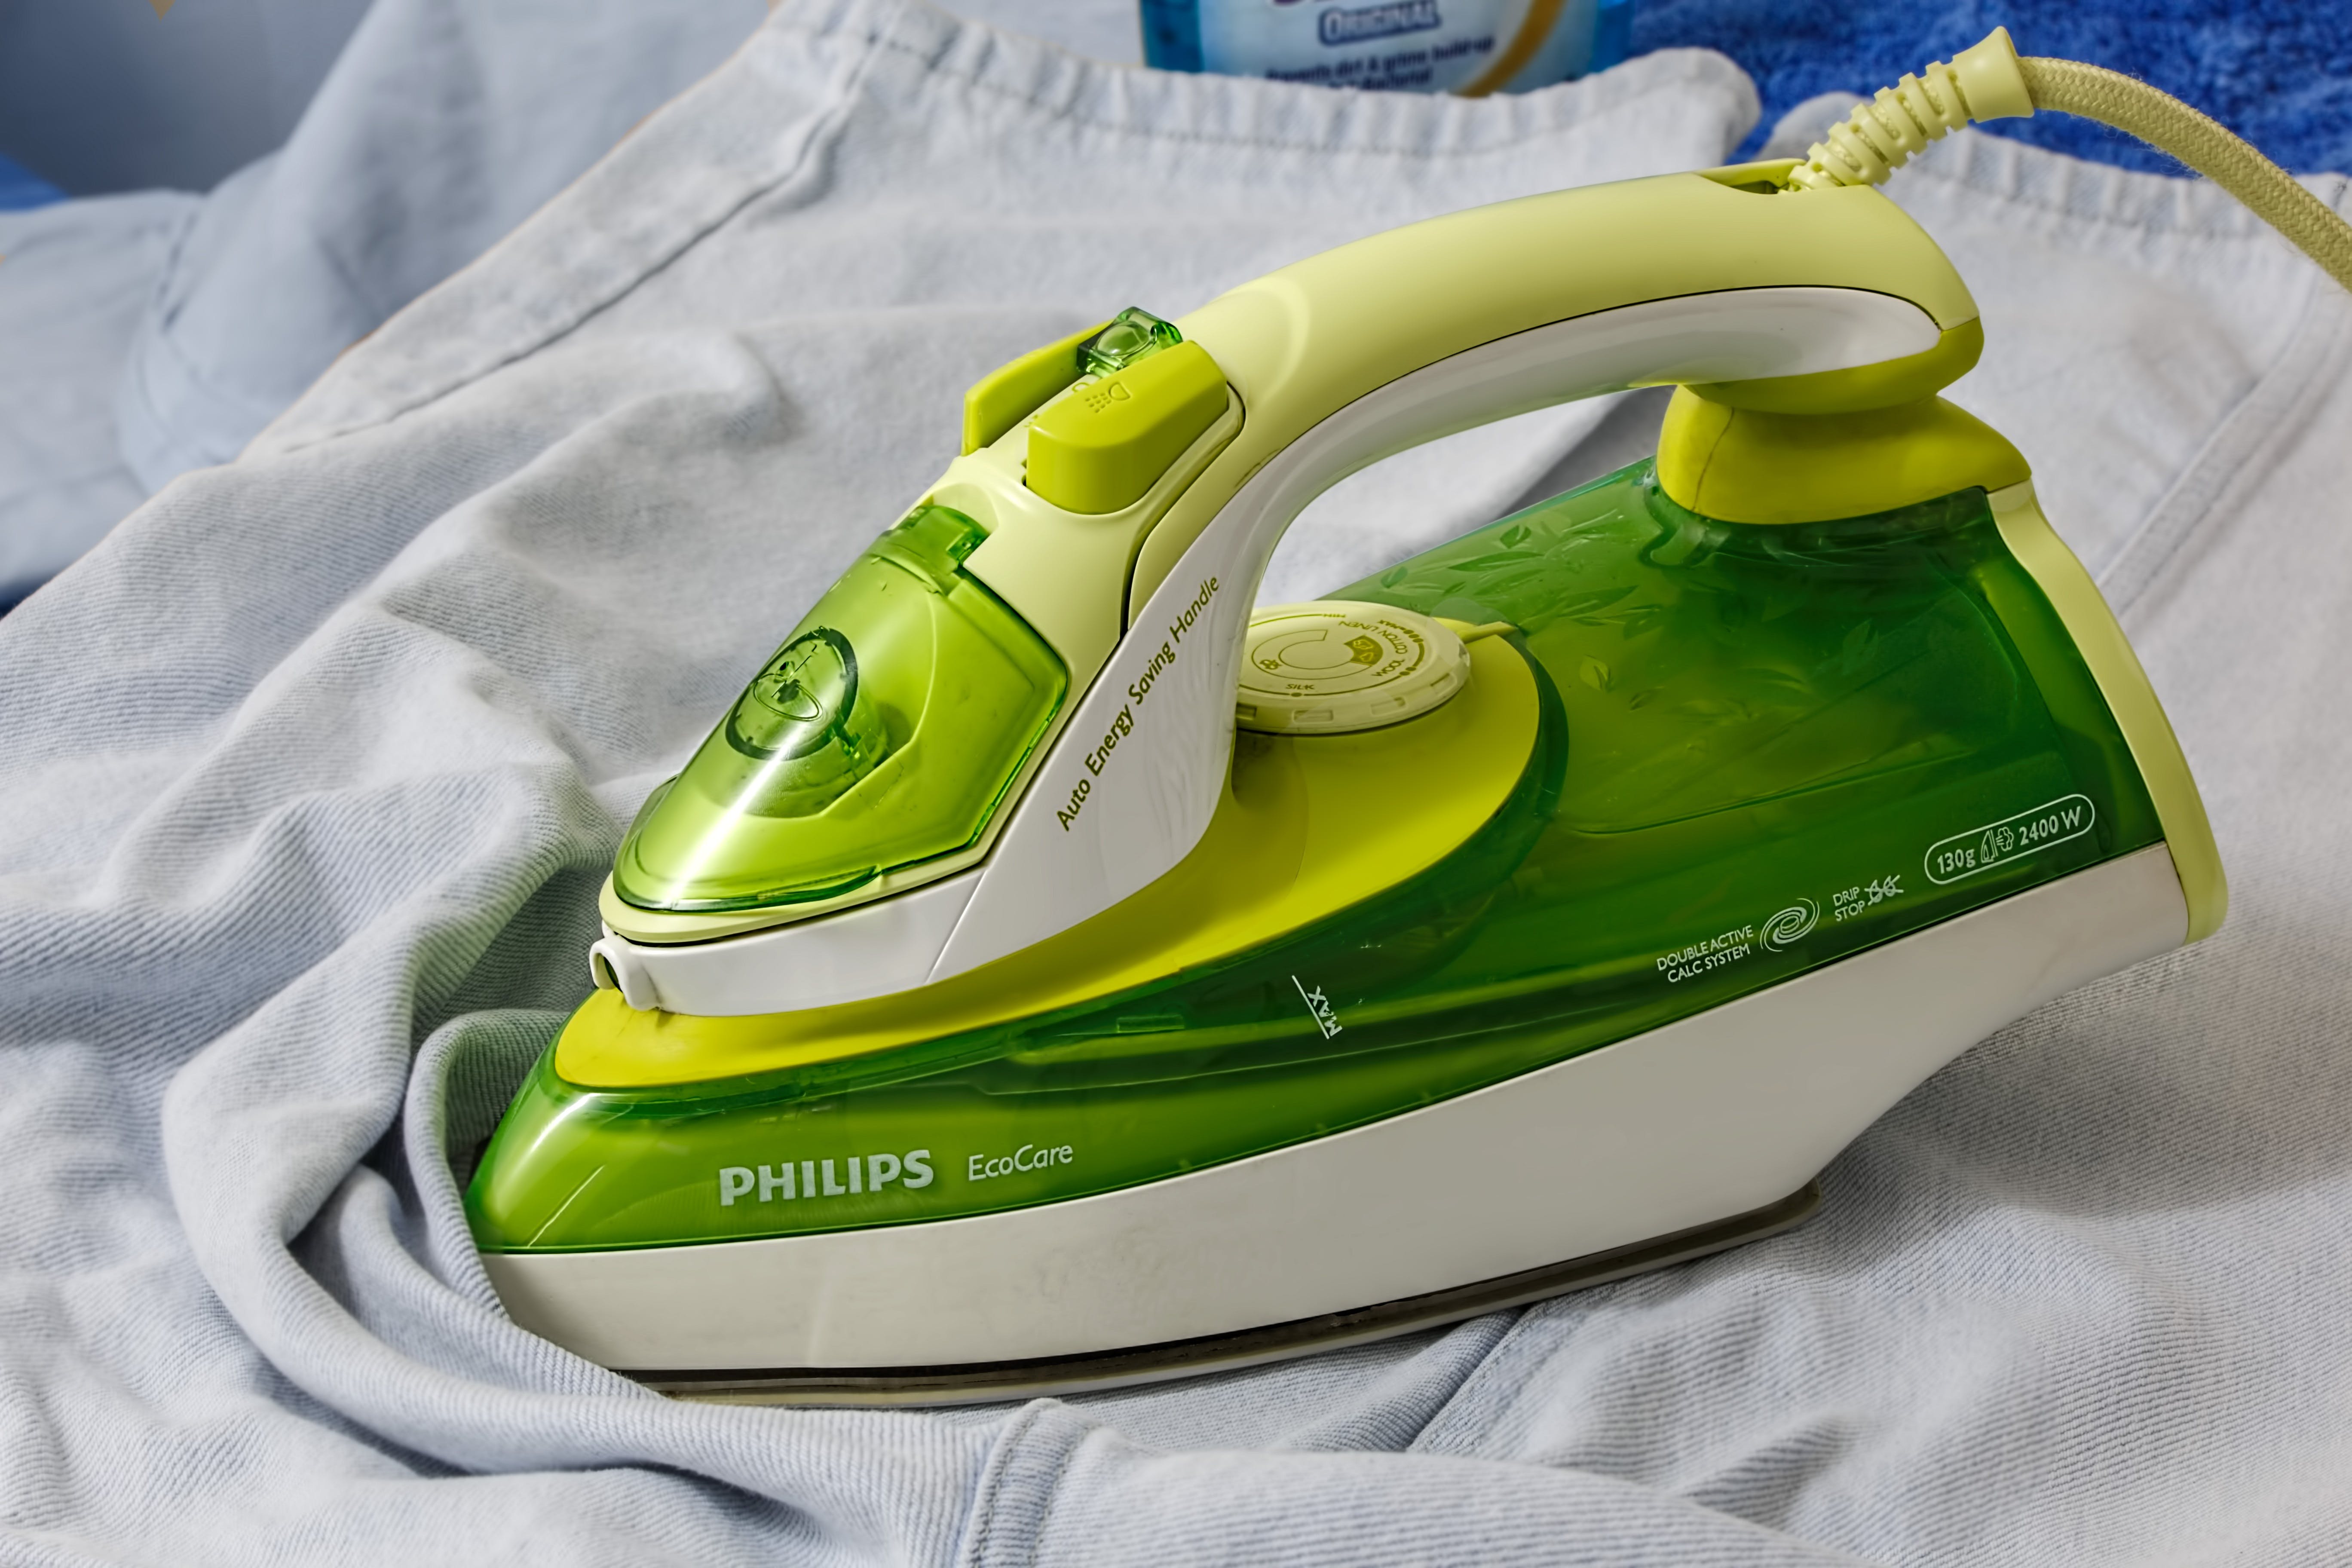 A green-white philips iron. | Source: Pexels